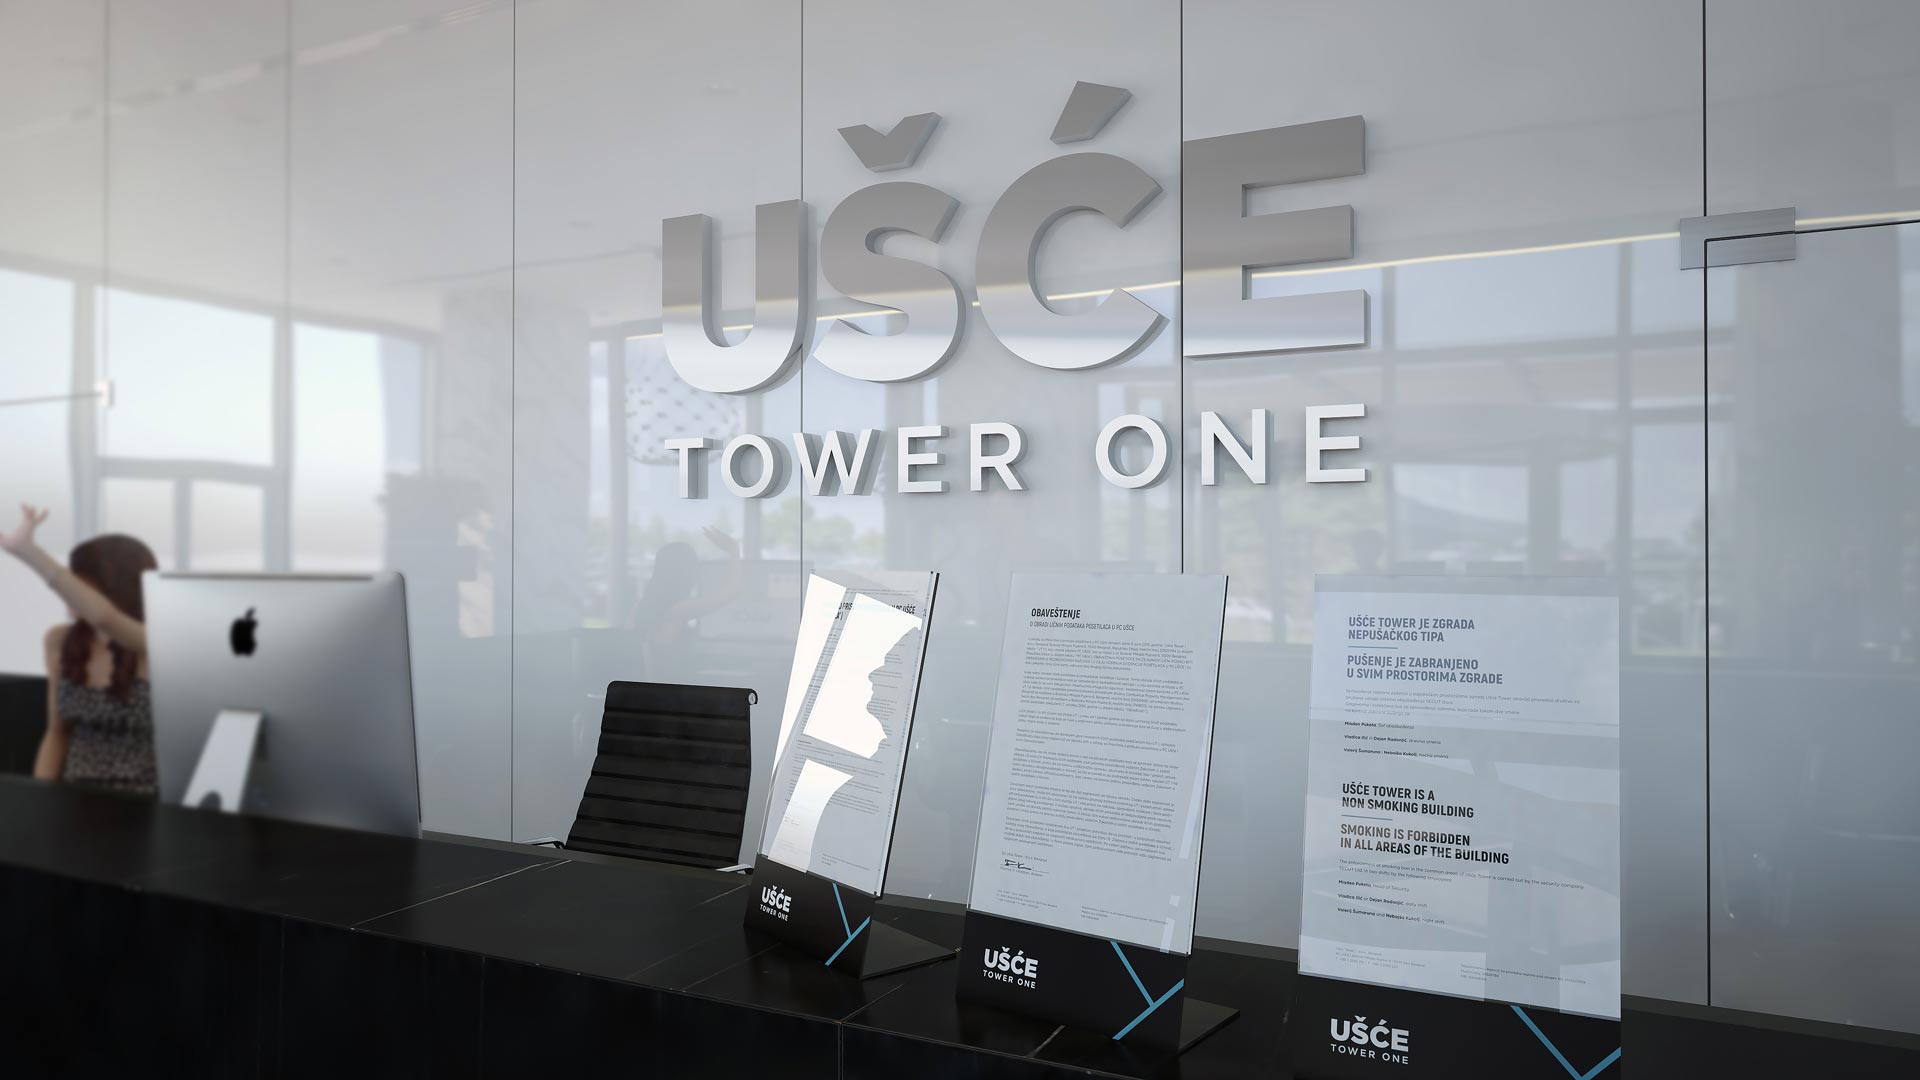 Usce tower one lobby3